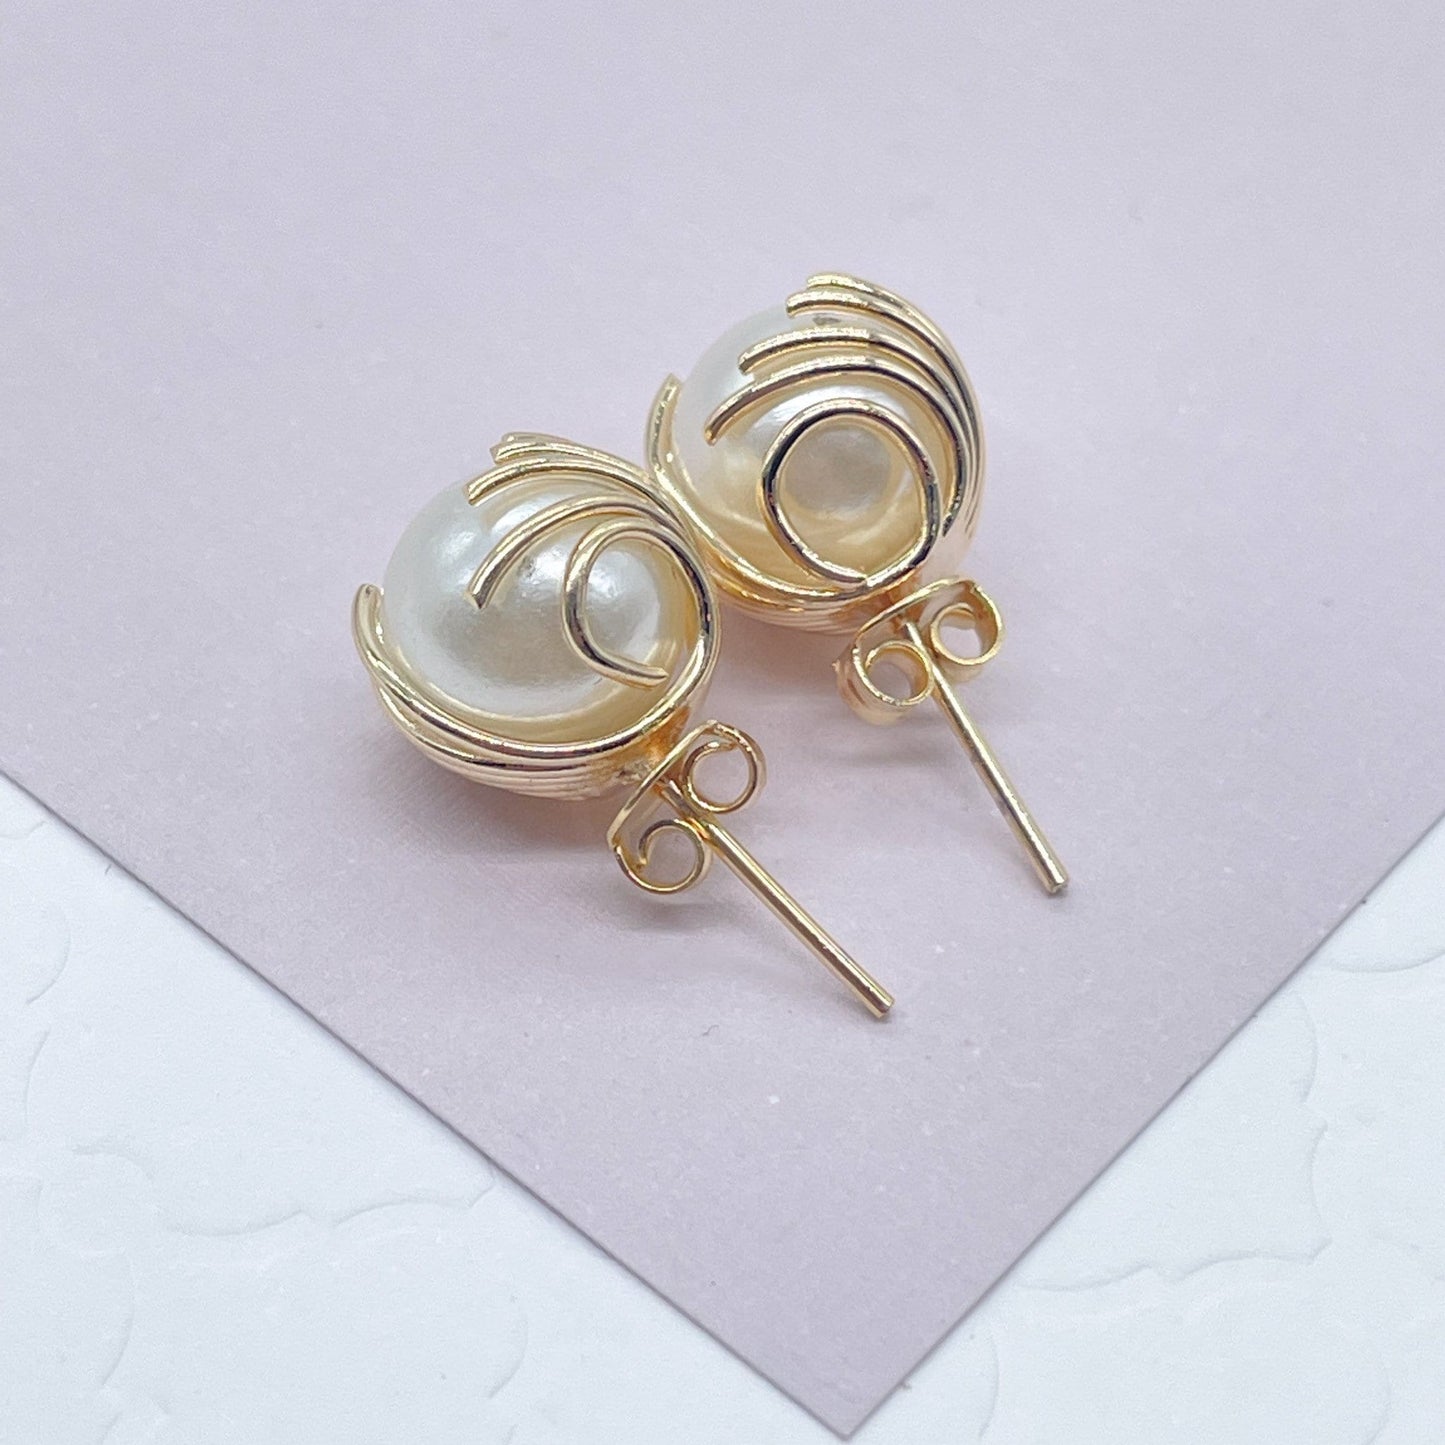 18k Gold Layered Pearl Stud Earrings Wrapped In Gold Thread, Grabbed By Wires